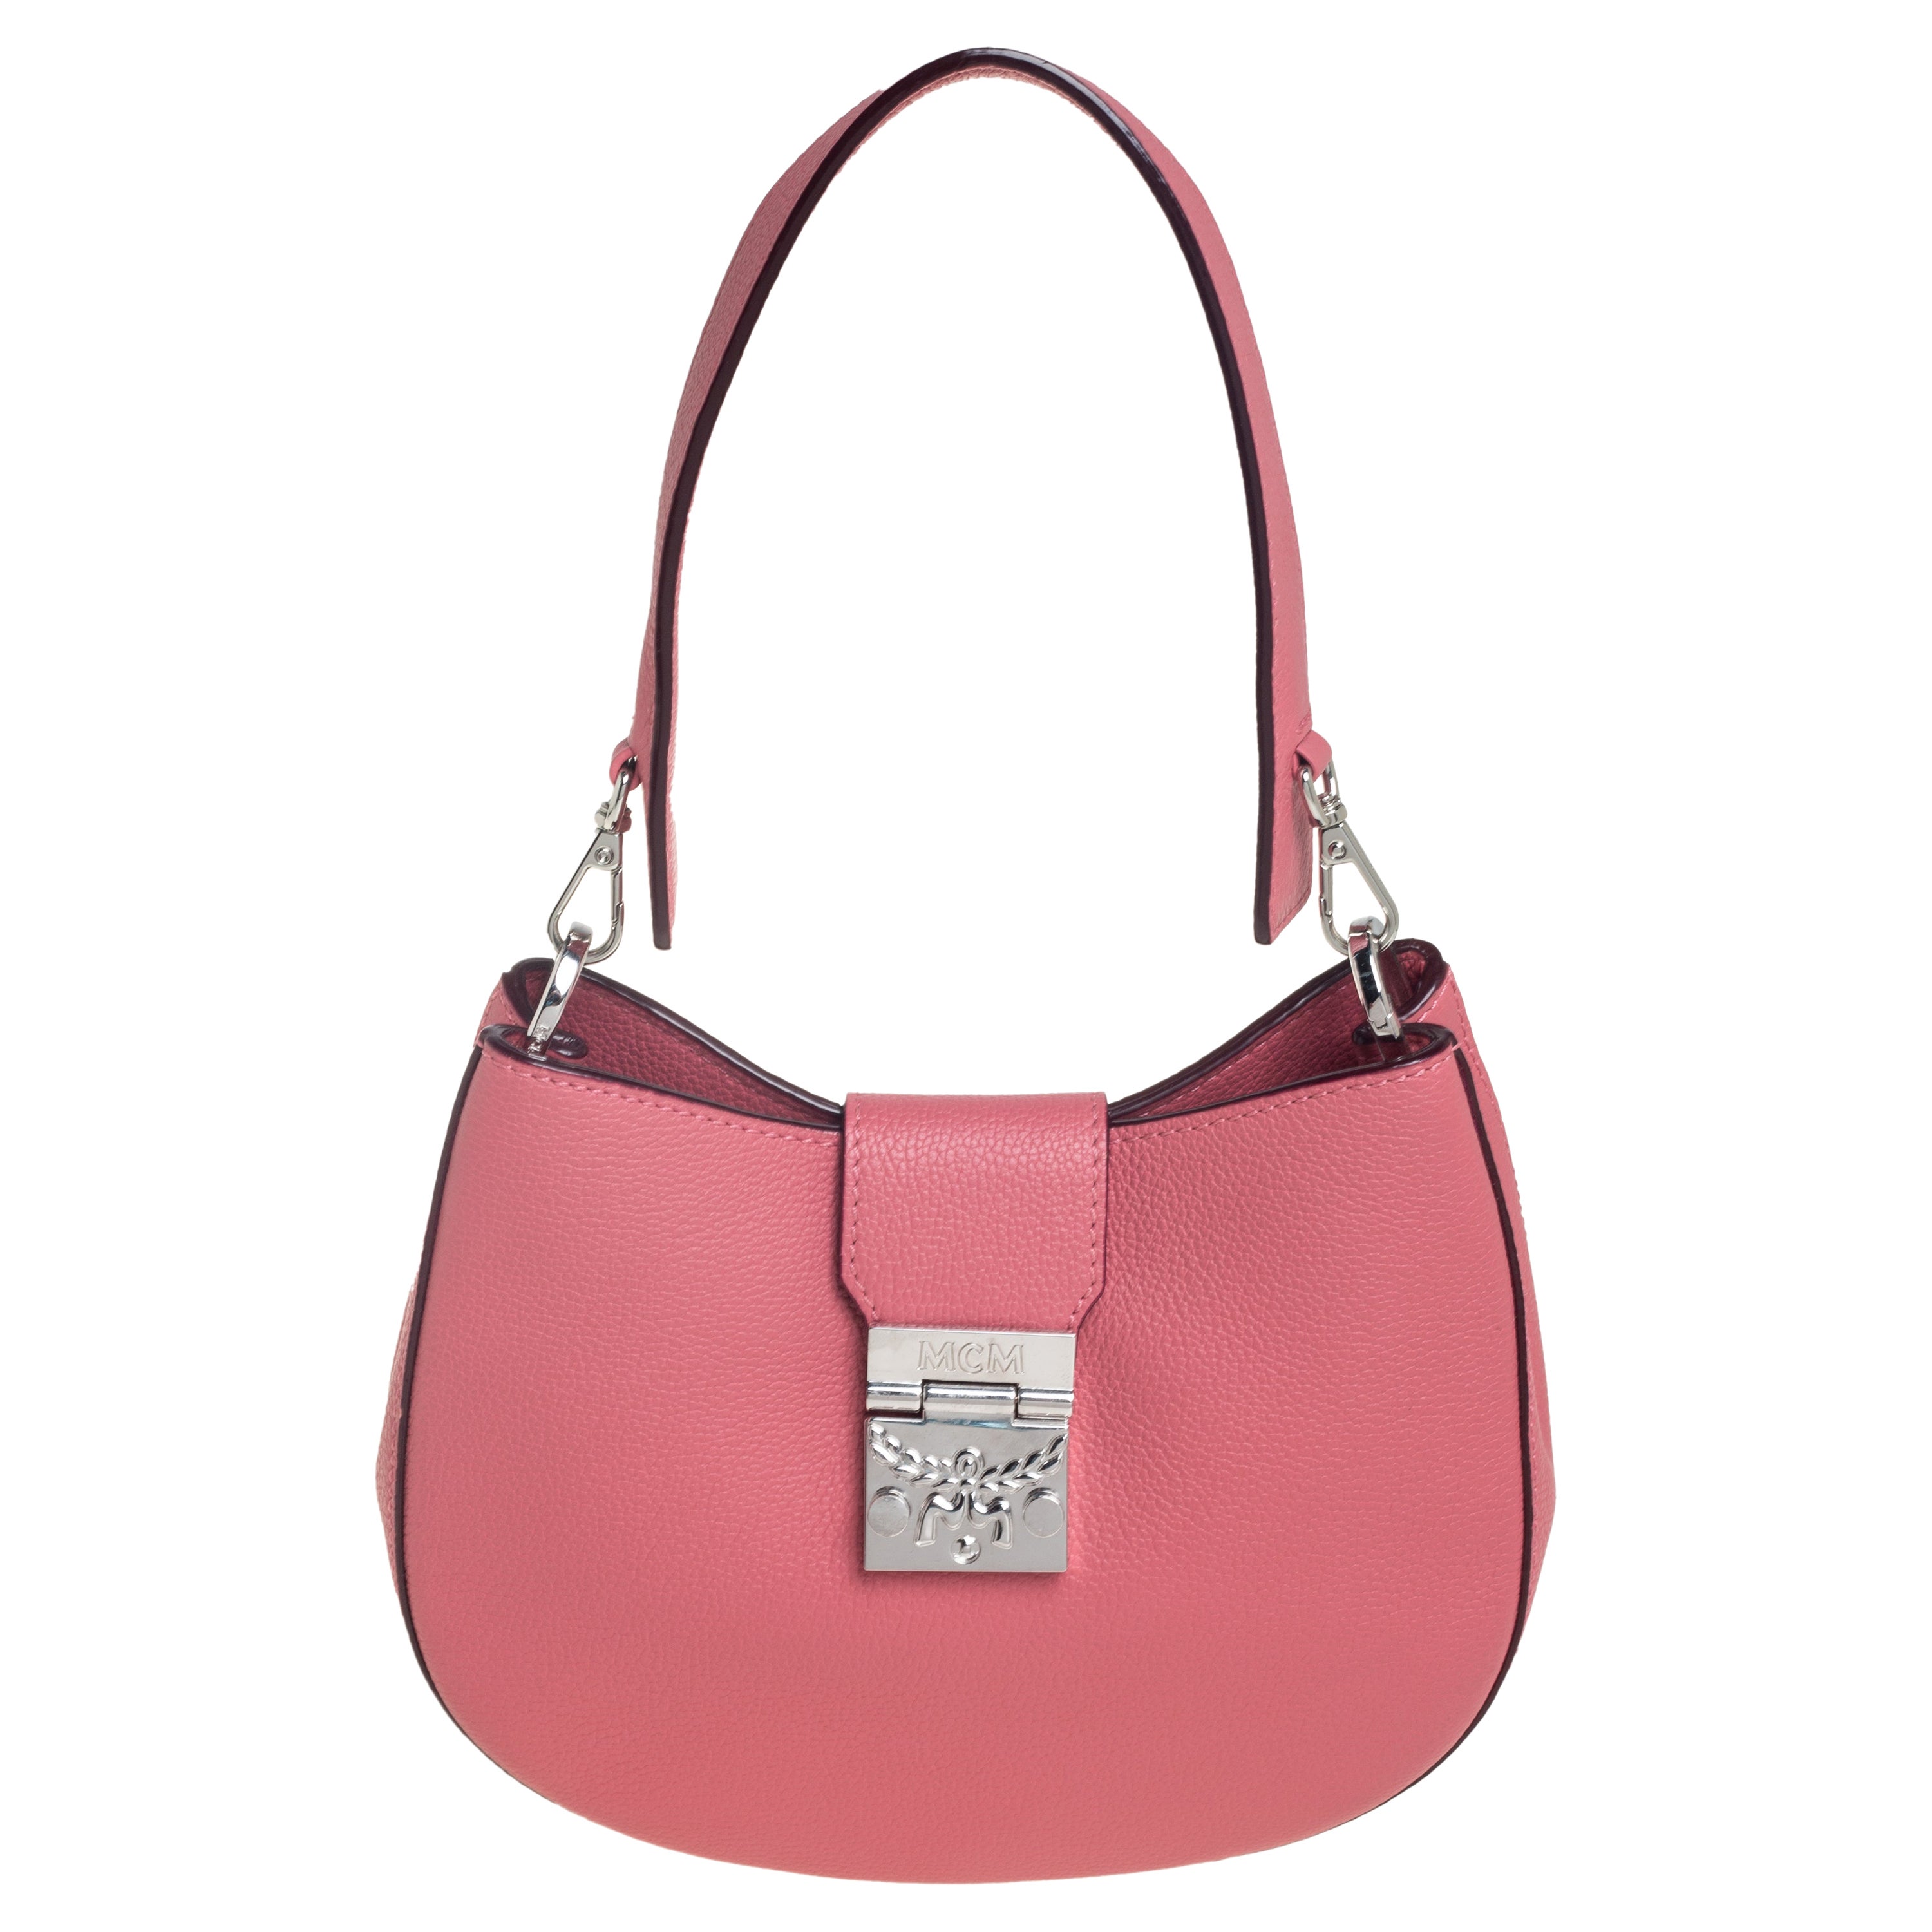 MCM Pink Leather Patricia Hobo